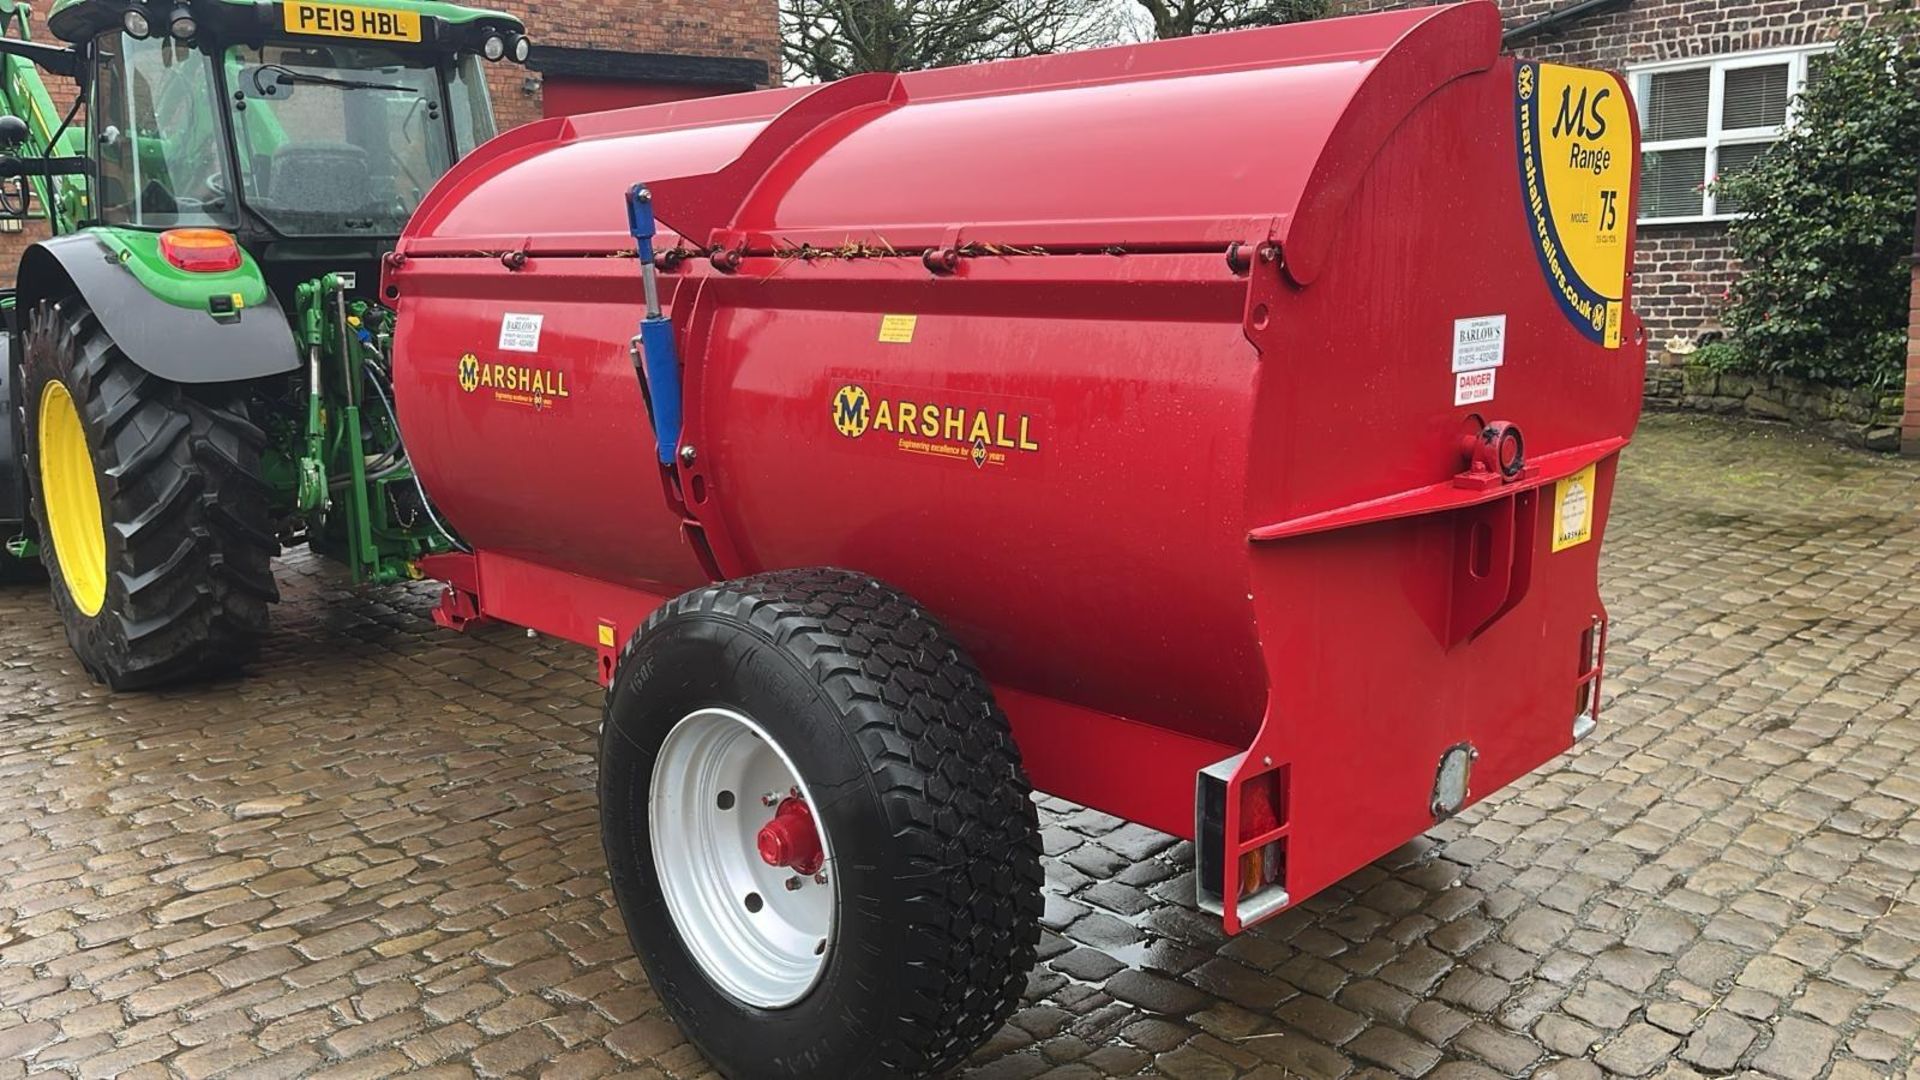 2016 MARSHALL MS 75 ROTARY MANURE SPREADER 7.5 CUBIC YARDS CARRYING CAPACITY 5 TONNE SERIAL NUMBER - Image 4 of 13